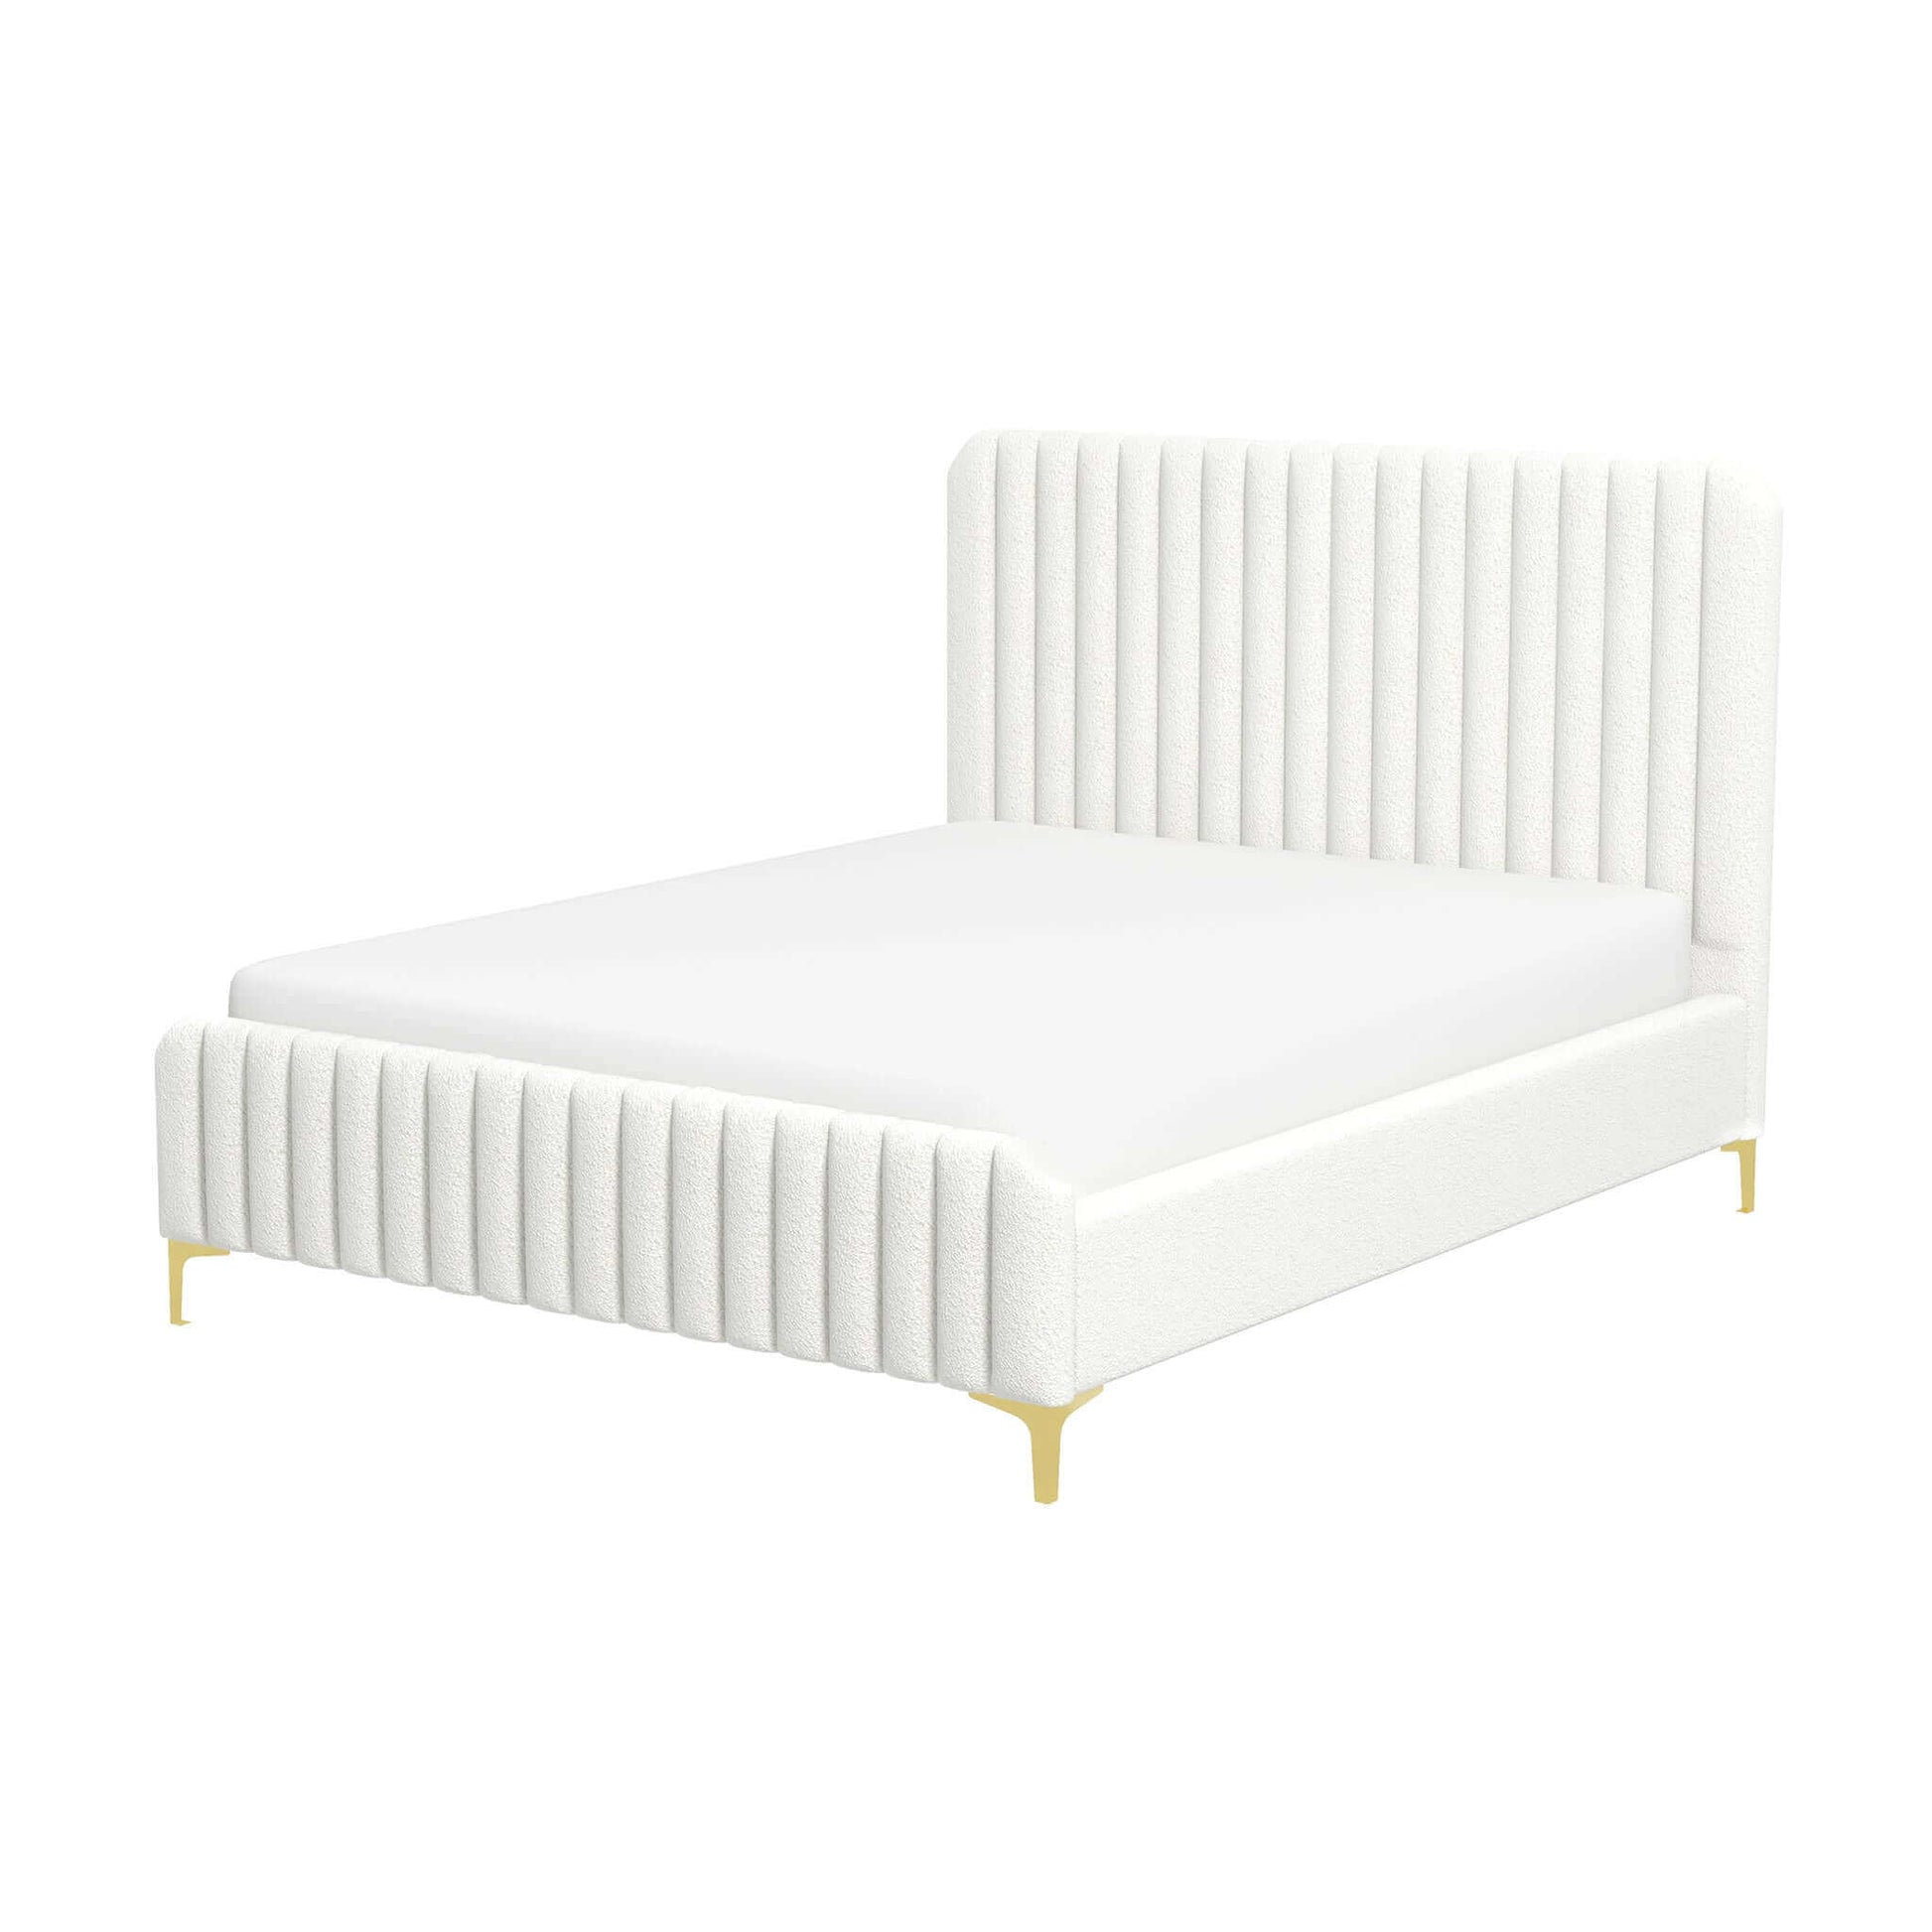 Ashcroft Furniture Co Bed Valery Queen / King Size Cream Boucle Platform Bed